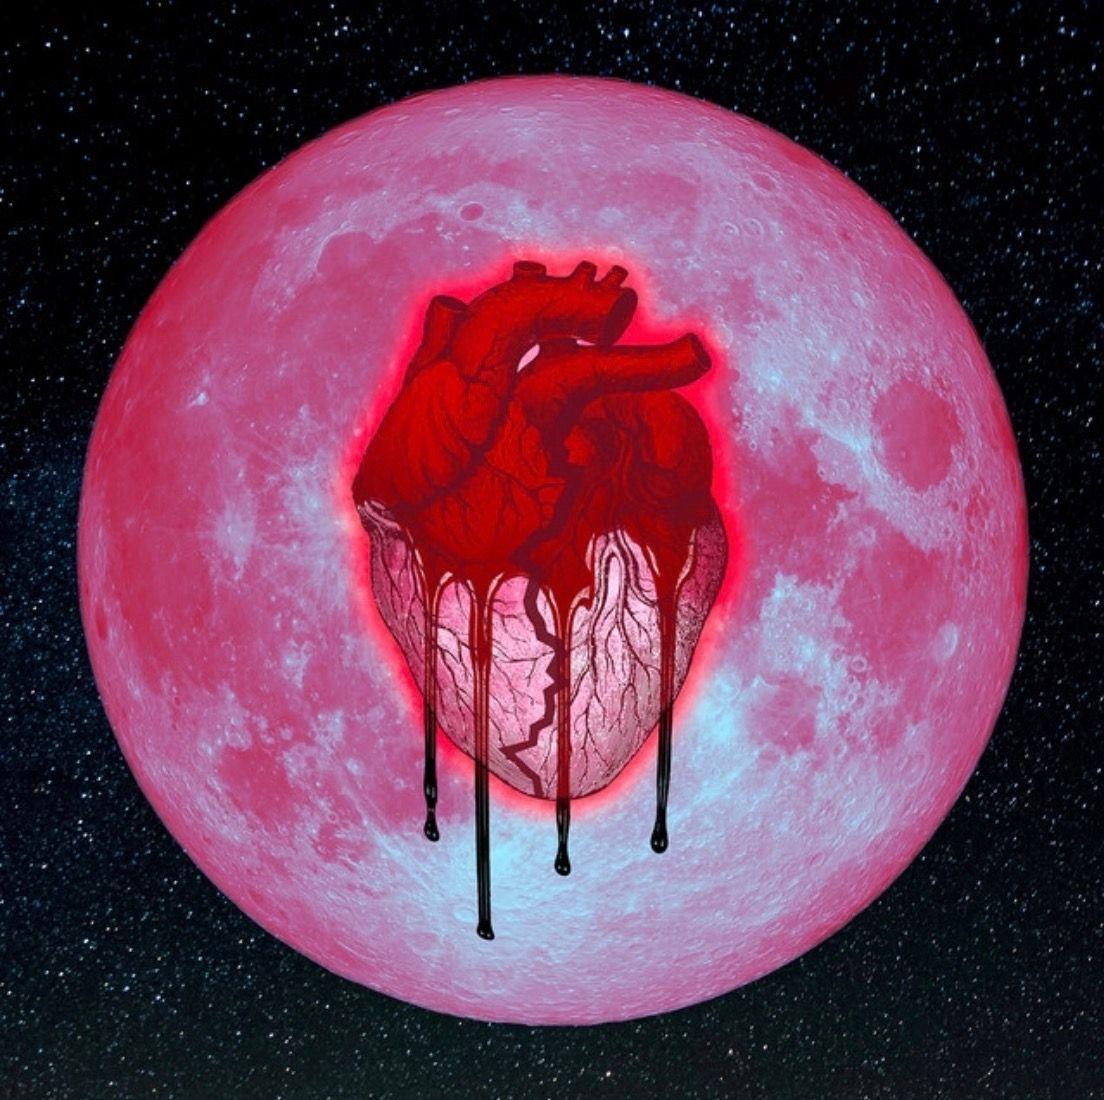 Chris Brown On A Full Moon [2017] Album. Music Imagery